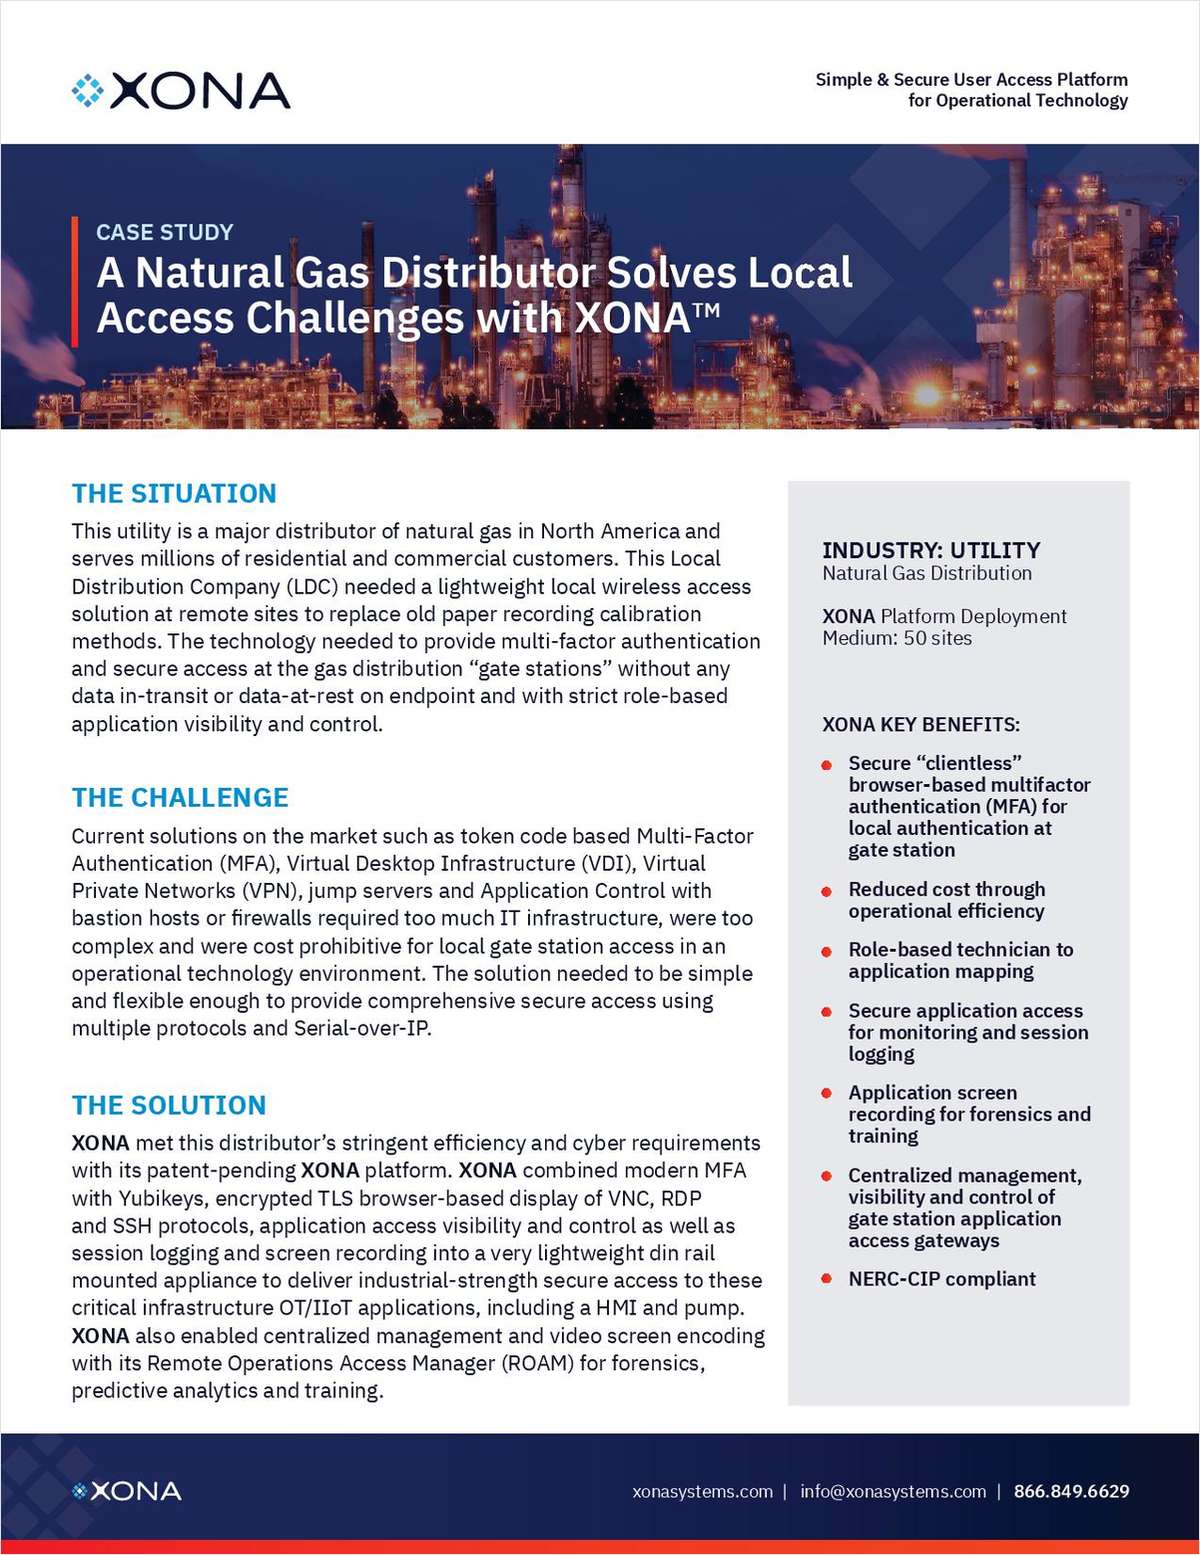 Case Study: Natural Gas Distributor Solves Local Access Challenges with XONA